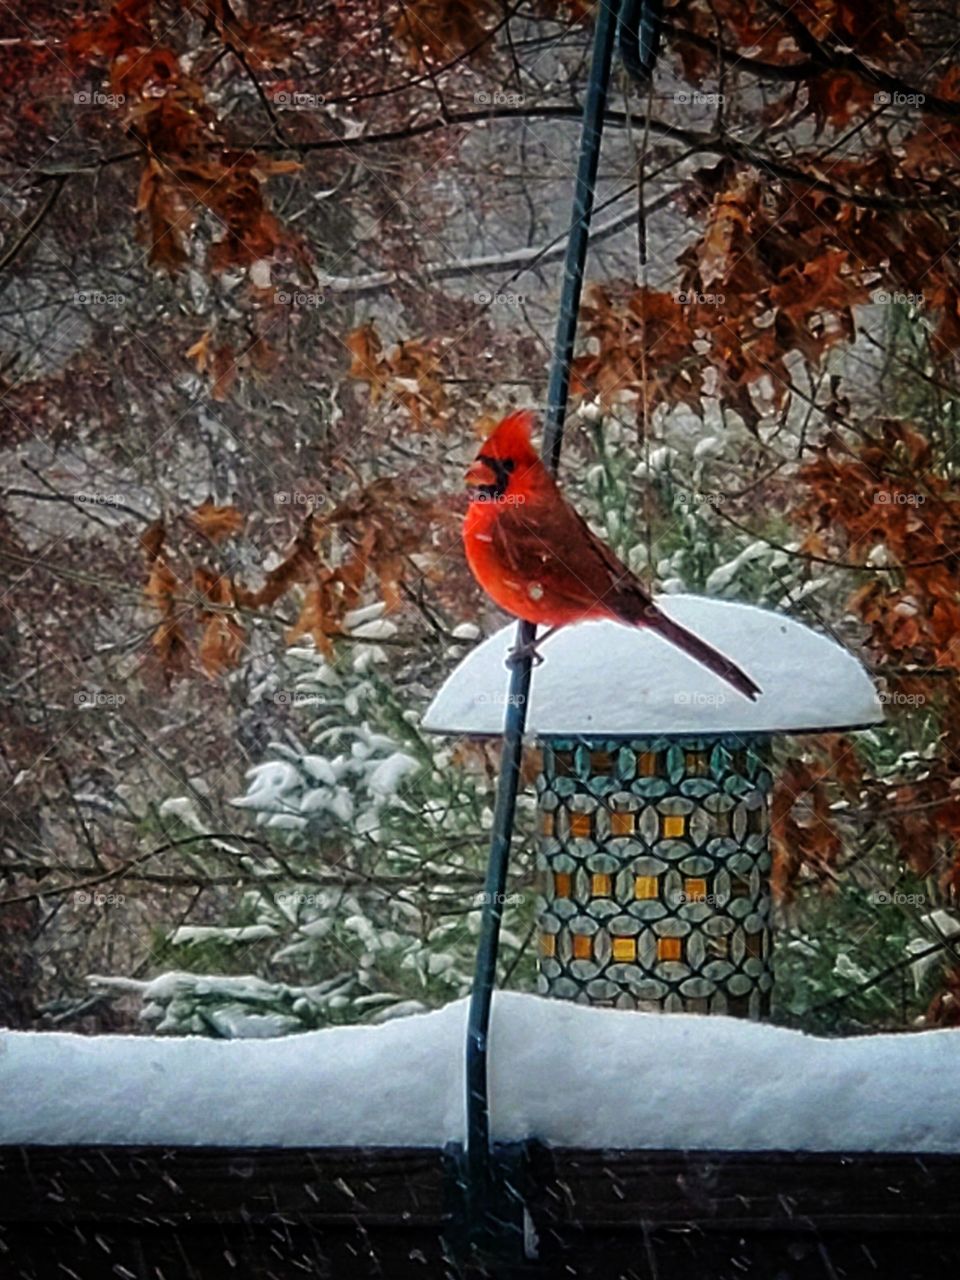 A beautiful Cardinal on our first winter storm!  